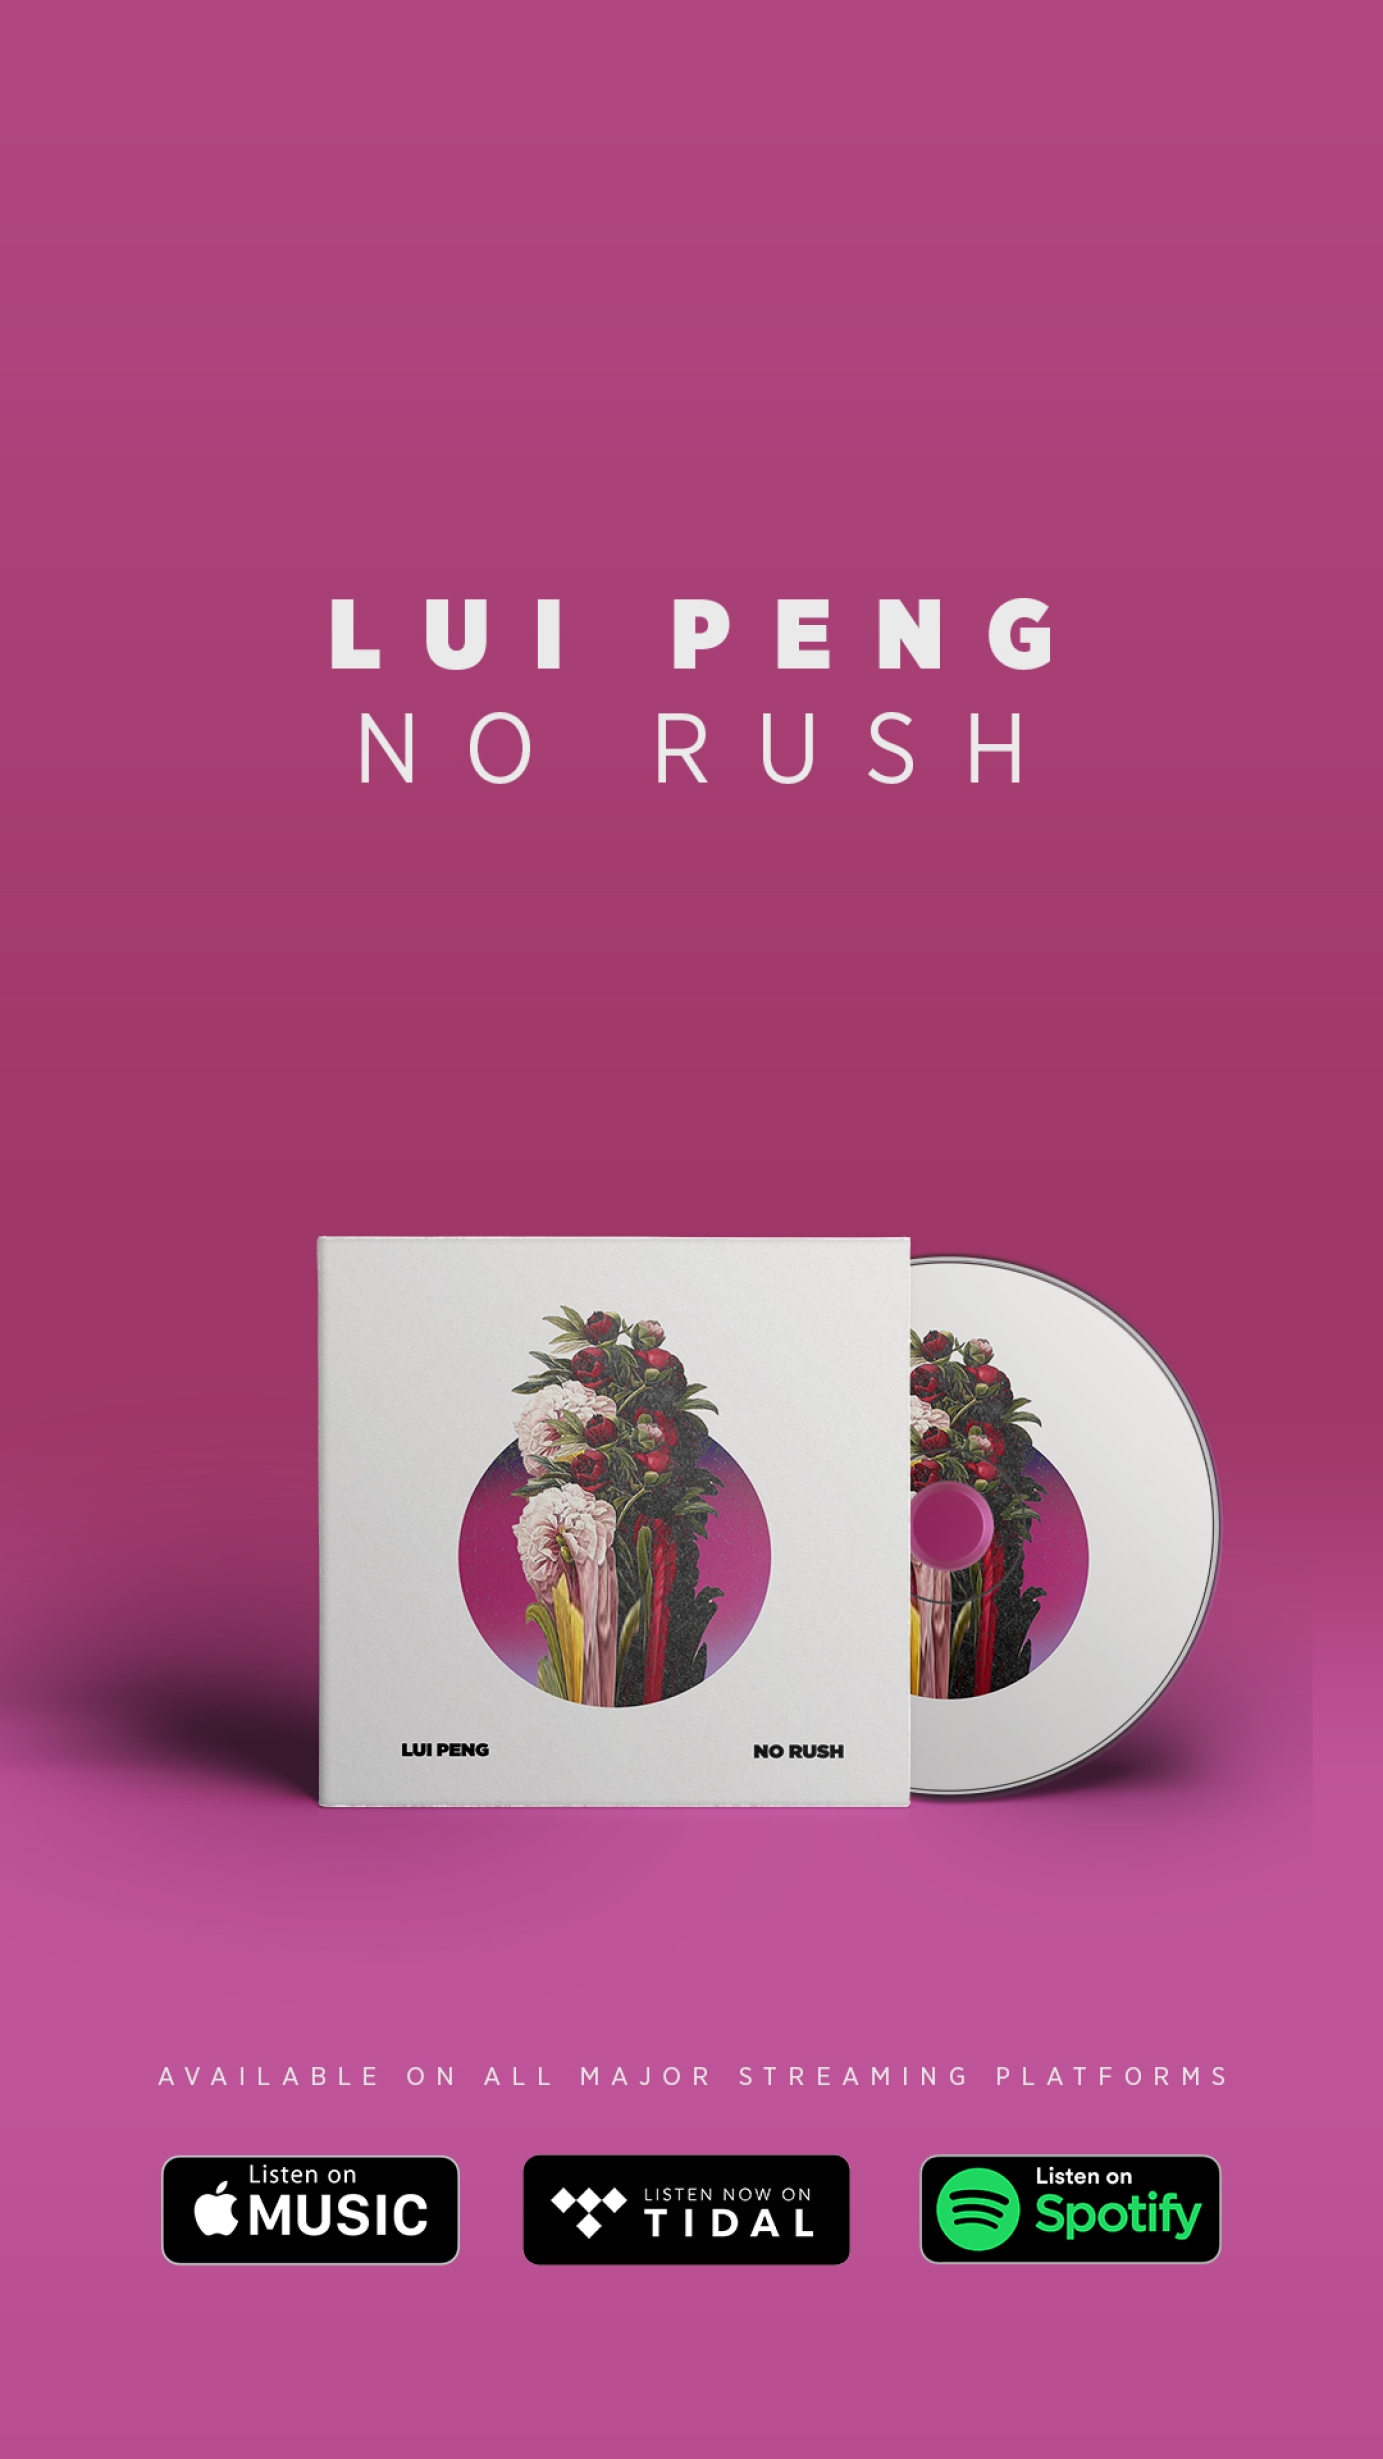 Artwork for Lui Peng by thembaerik